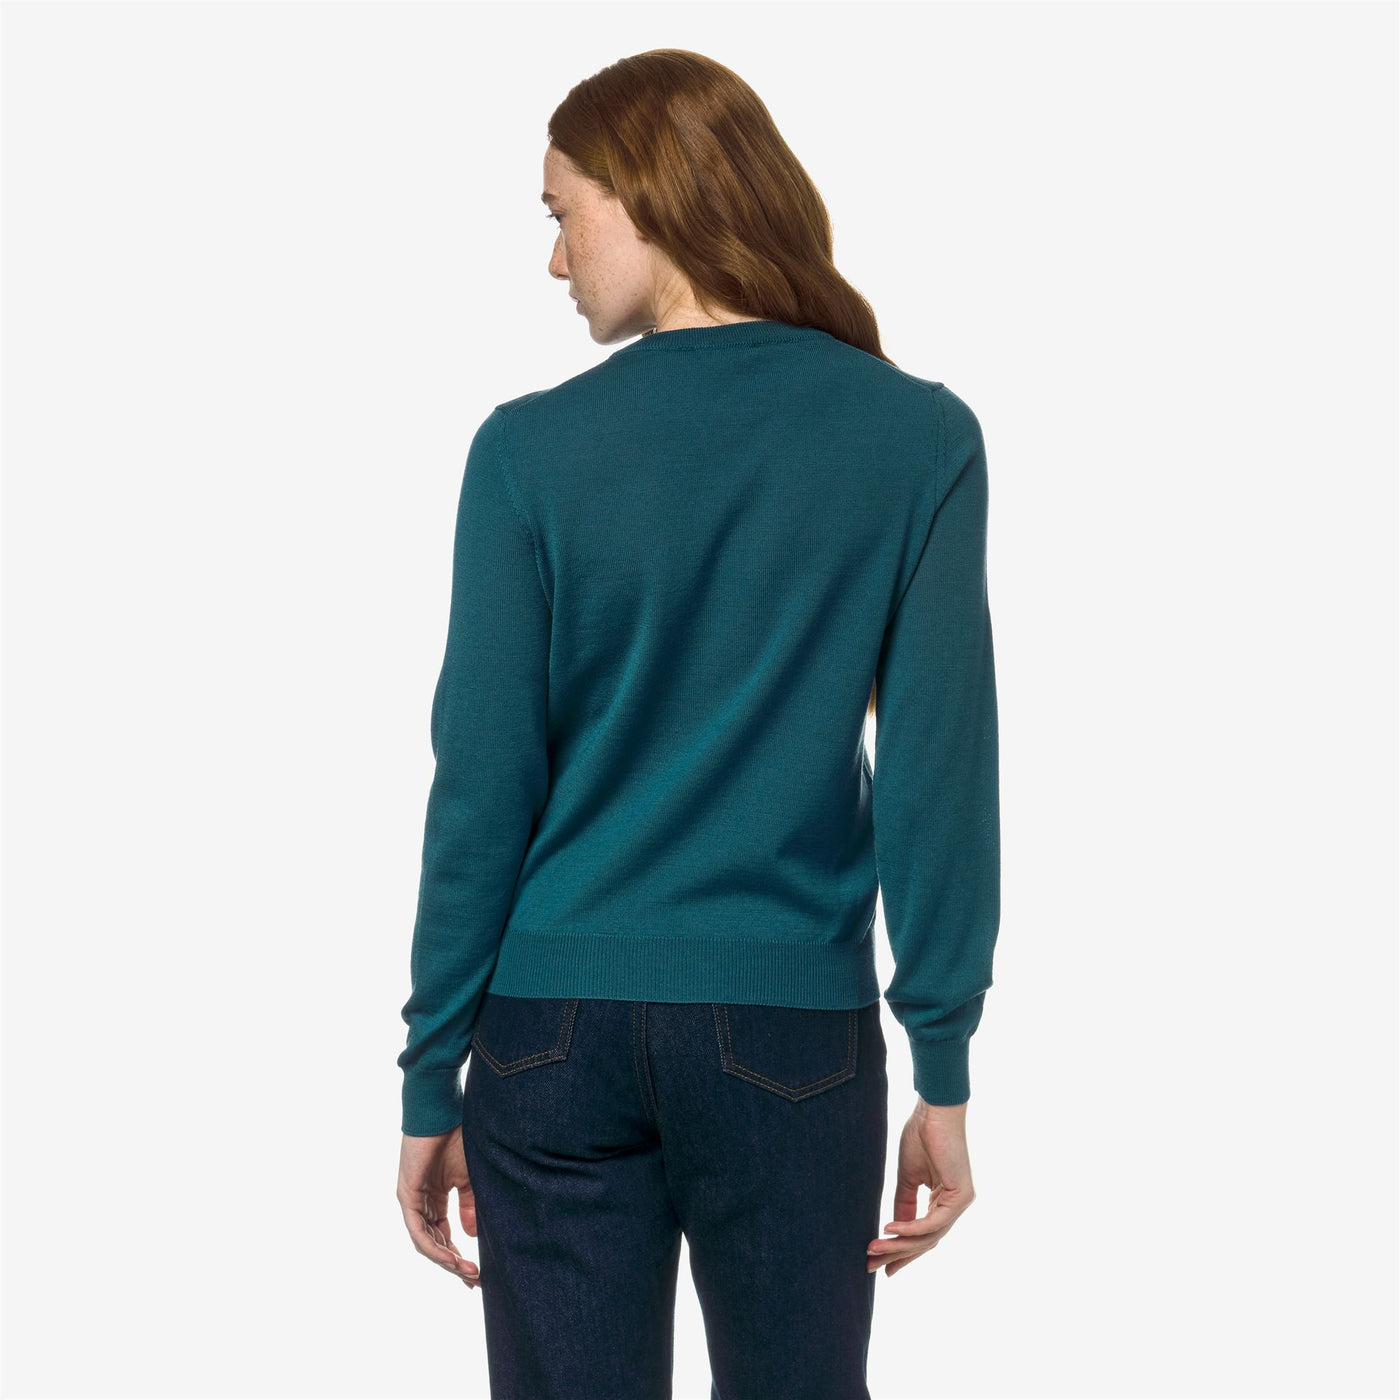 Knitwear Woman ABBI MERINO Pull  Over GREEN TEAL Dressed Front Double		